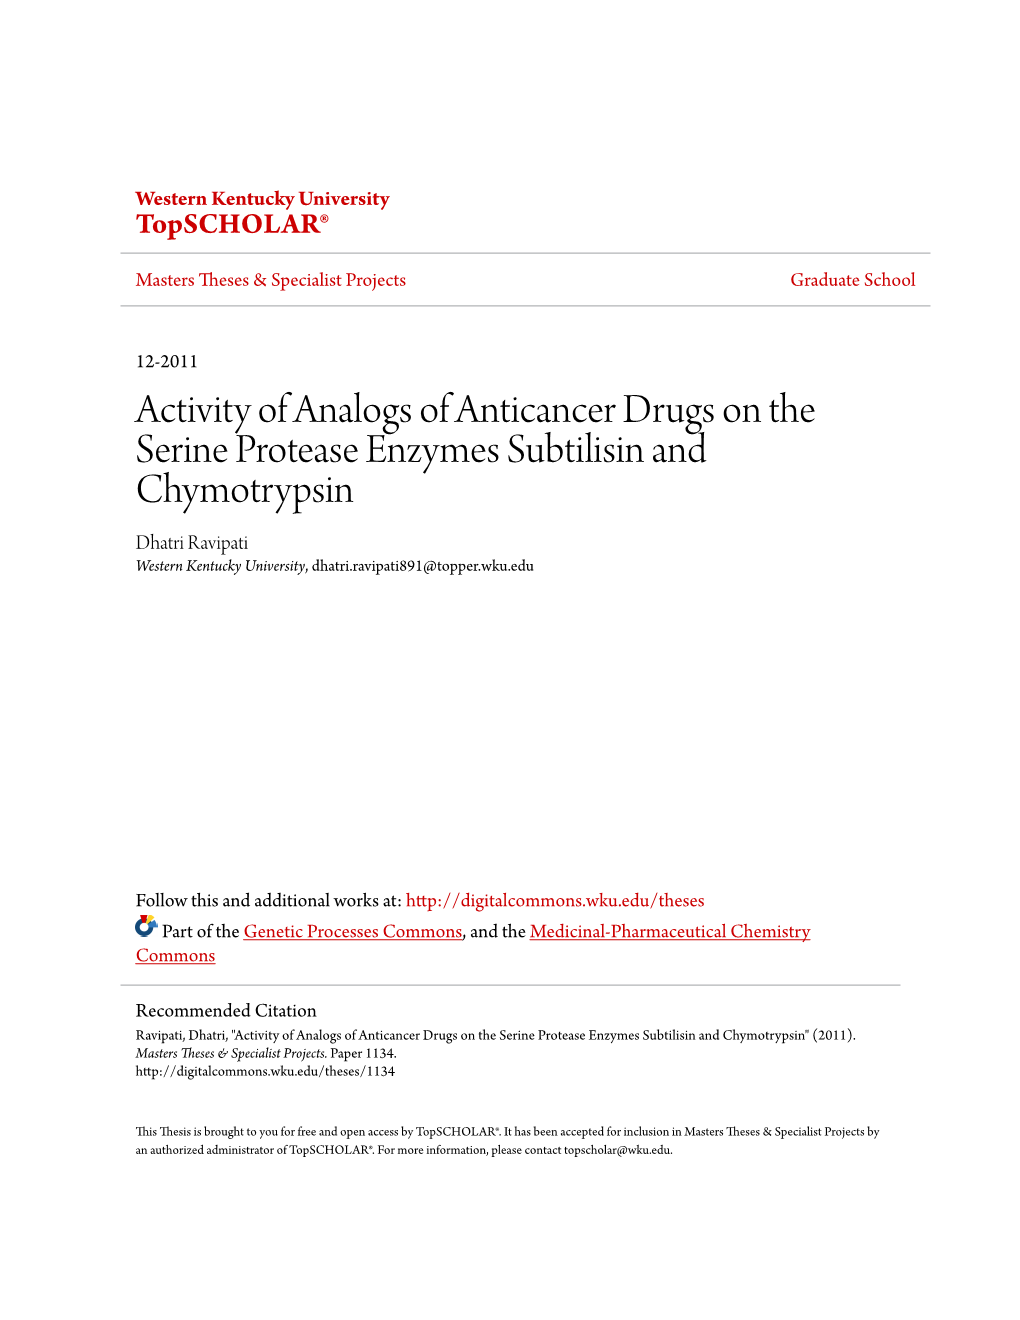 Activity of Analogs of Anticancer Drugs on the Serine Protease Enzymes